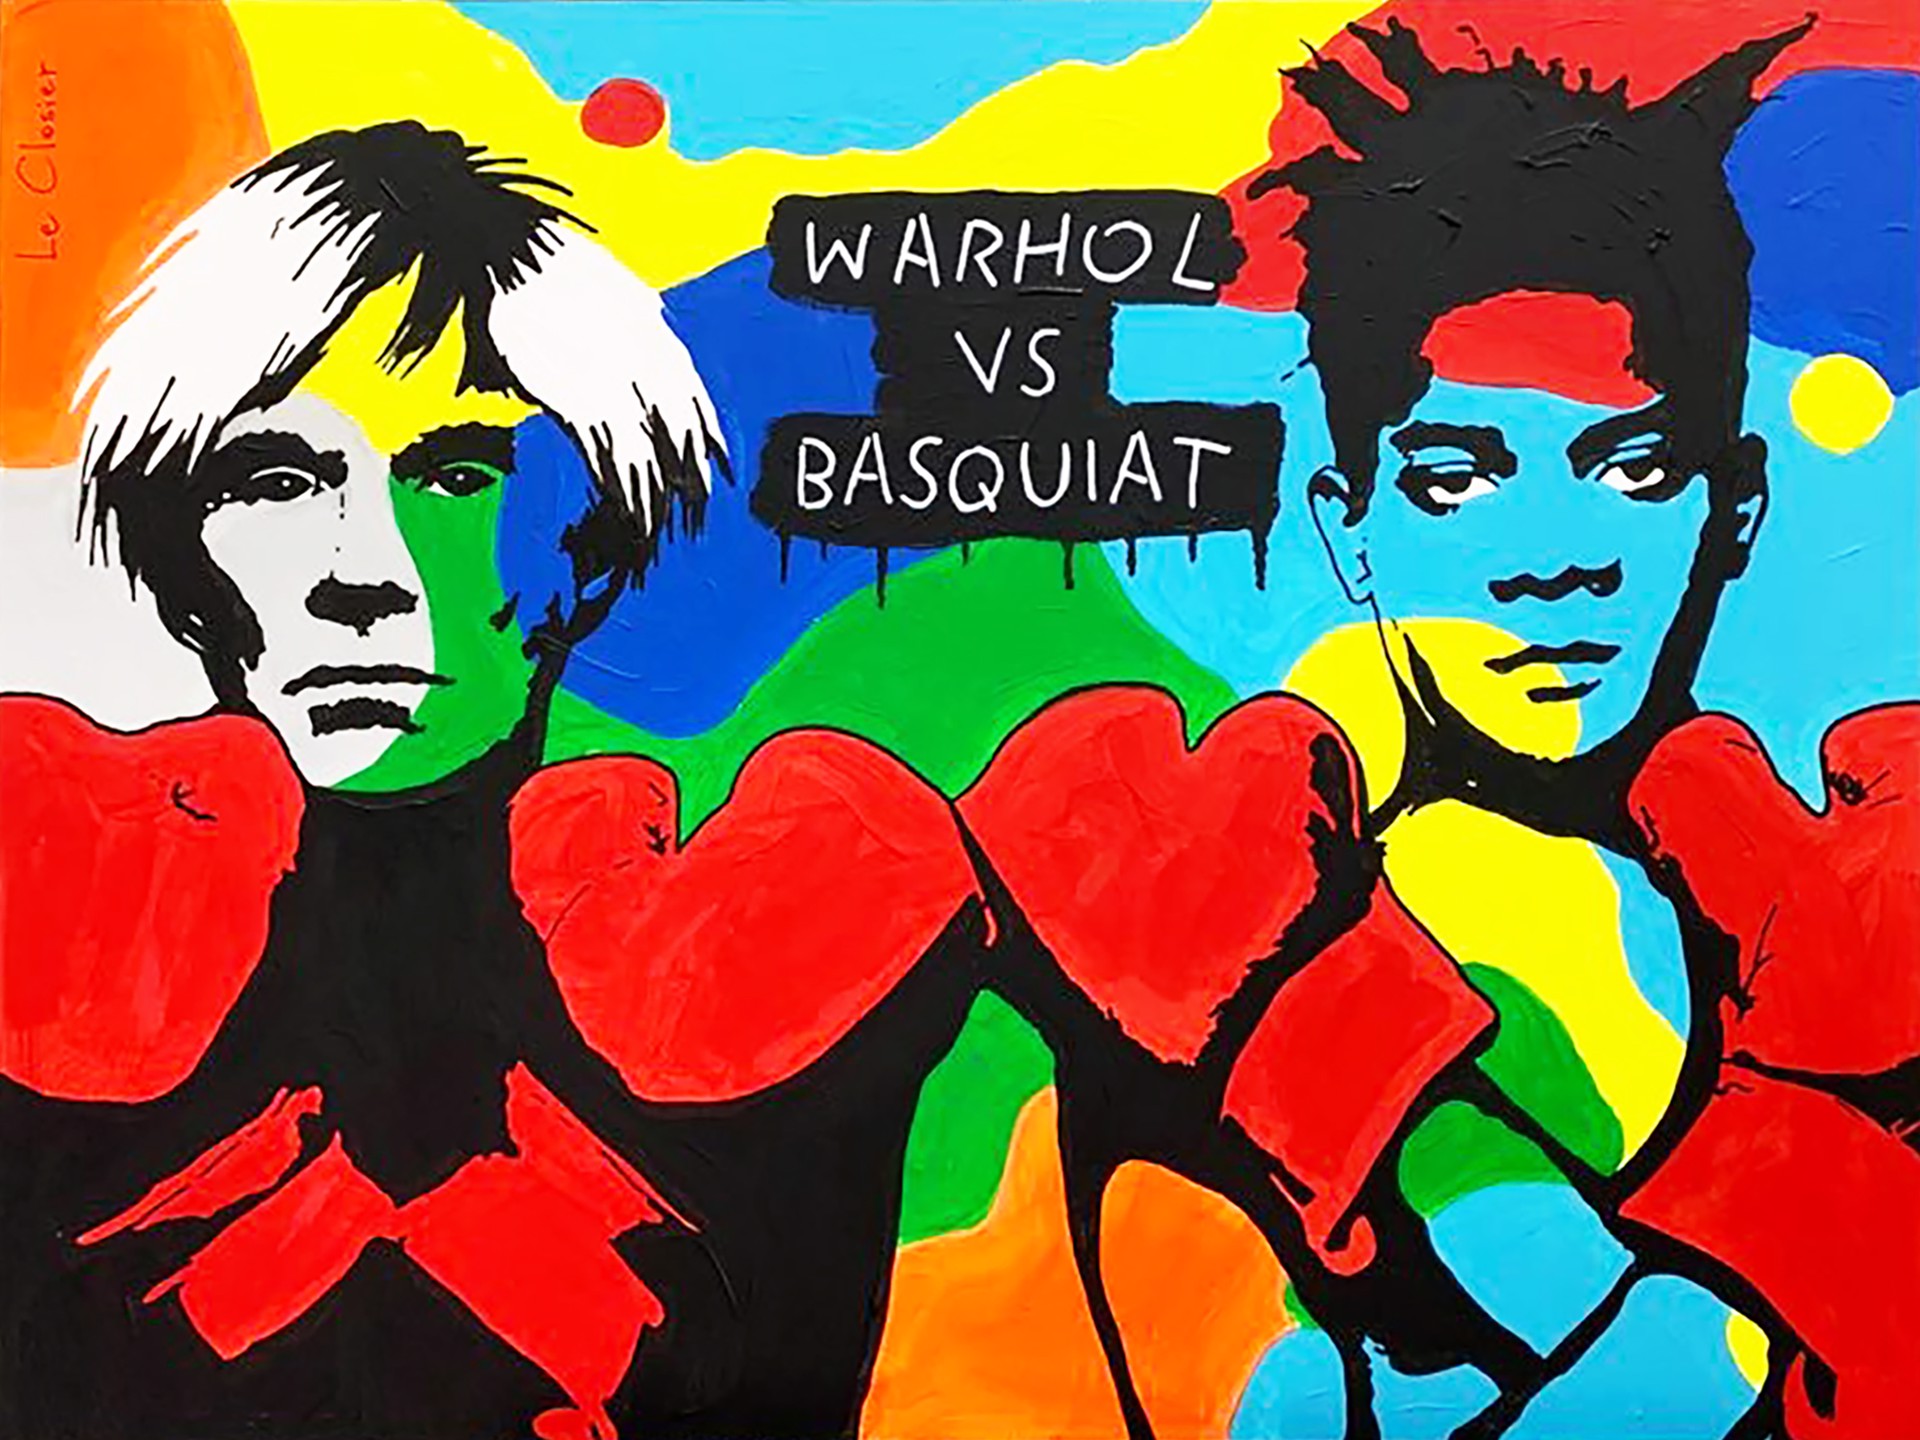 Warhol vs Basquiat by Philippe le Closier